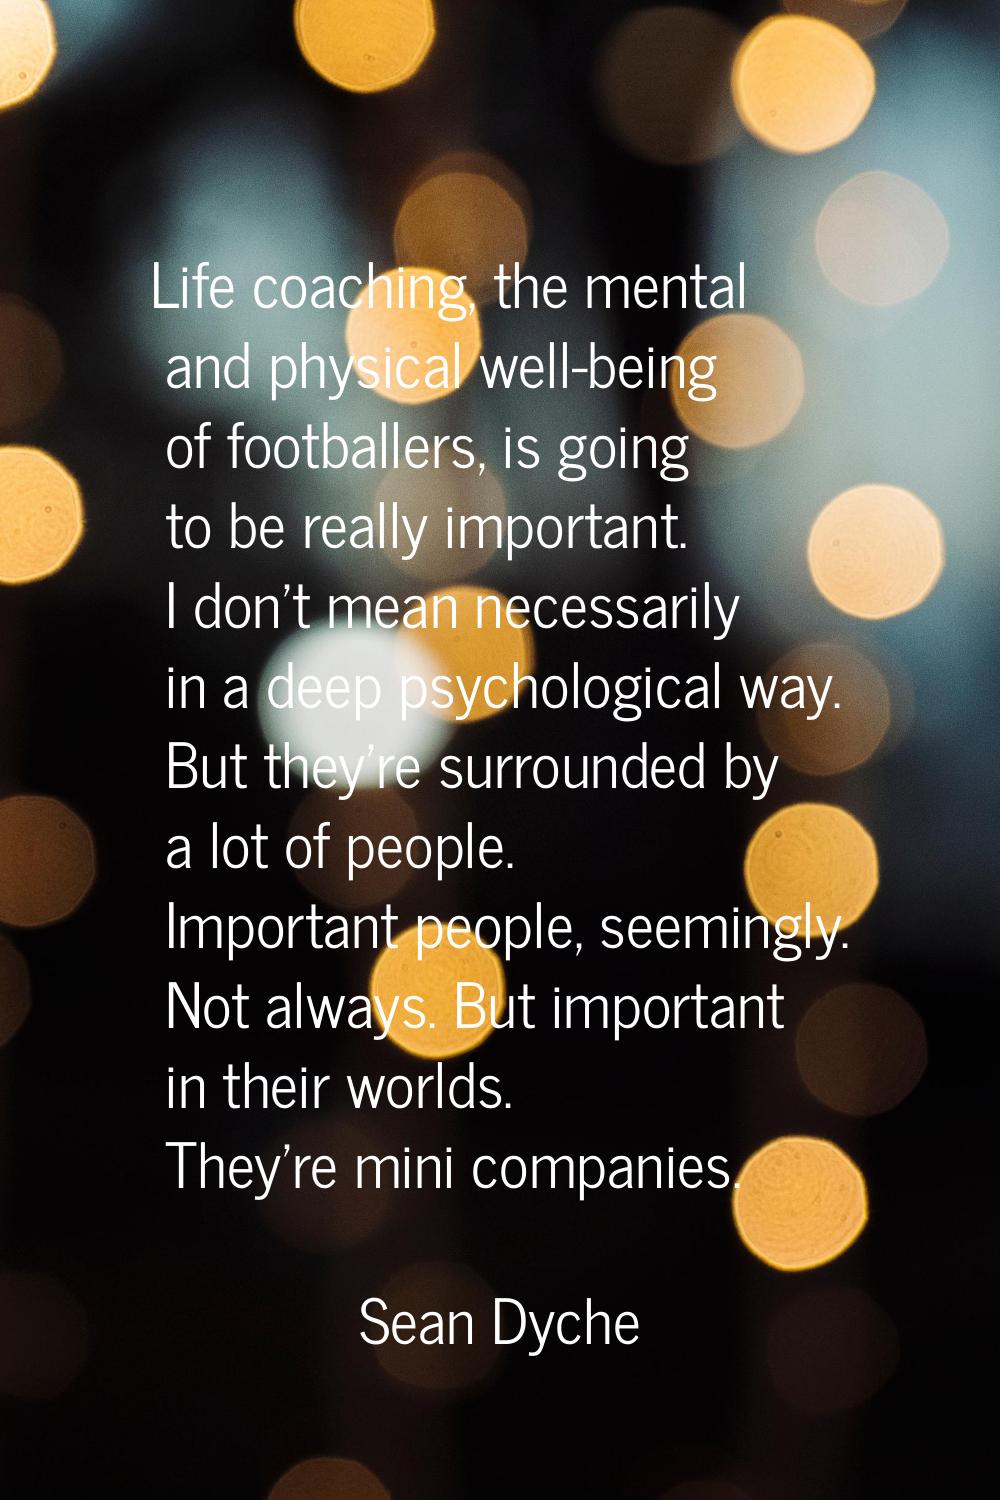 Life coaching, the mental and physical well-being of footballers, is going to be really important. 